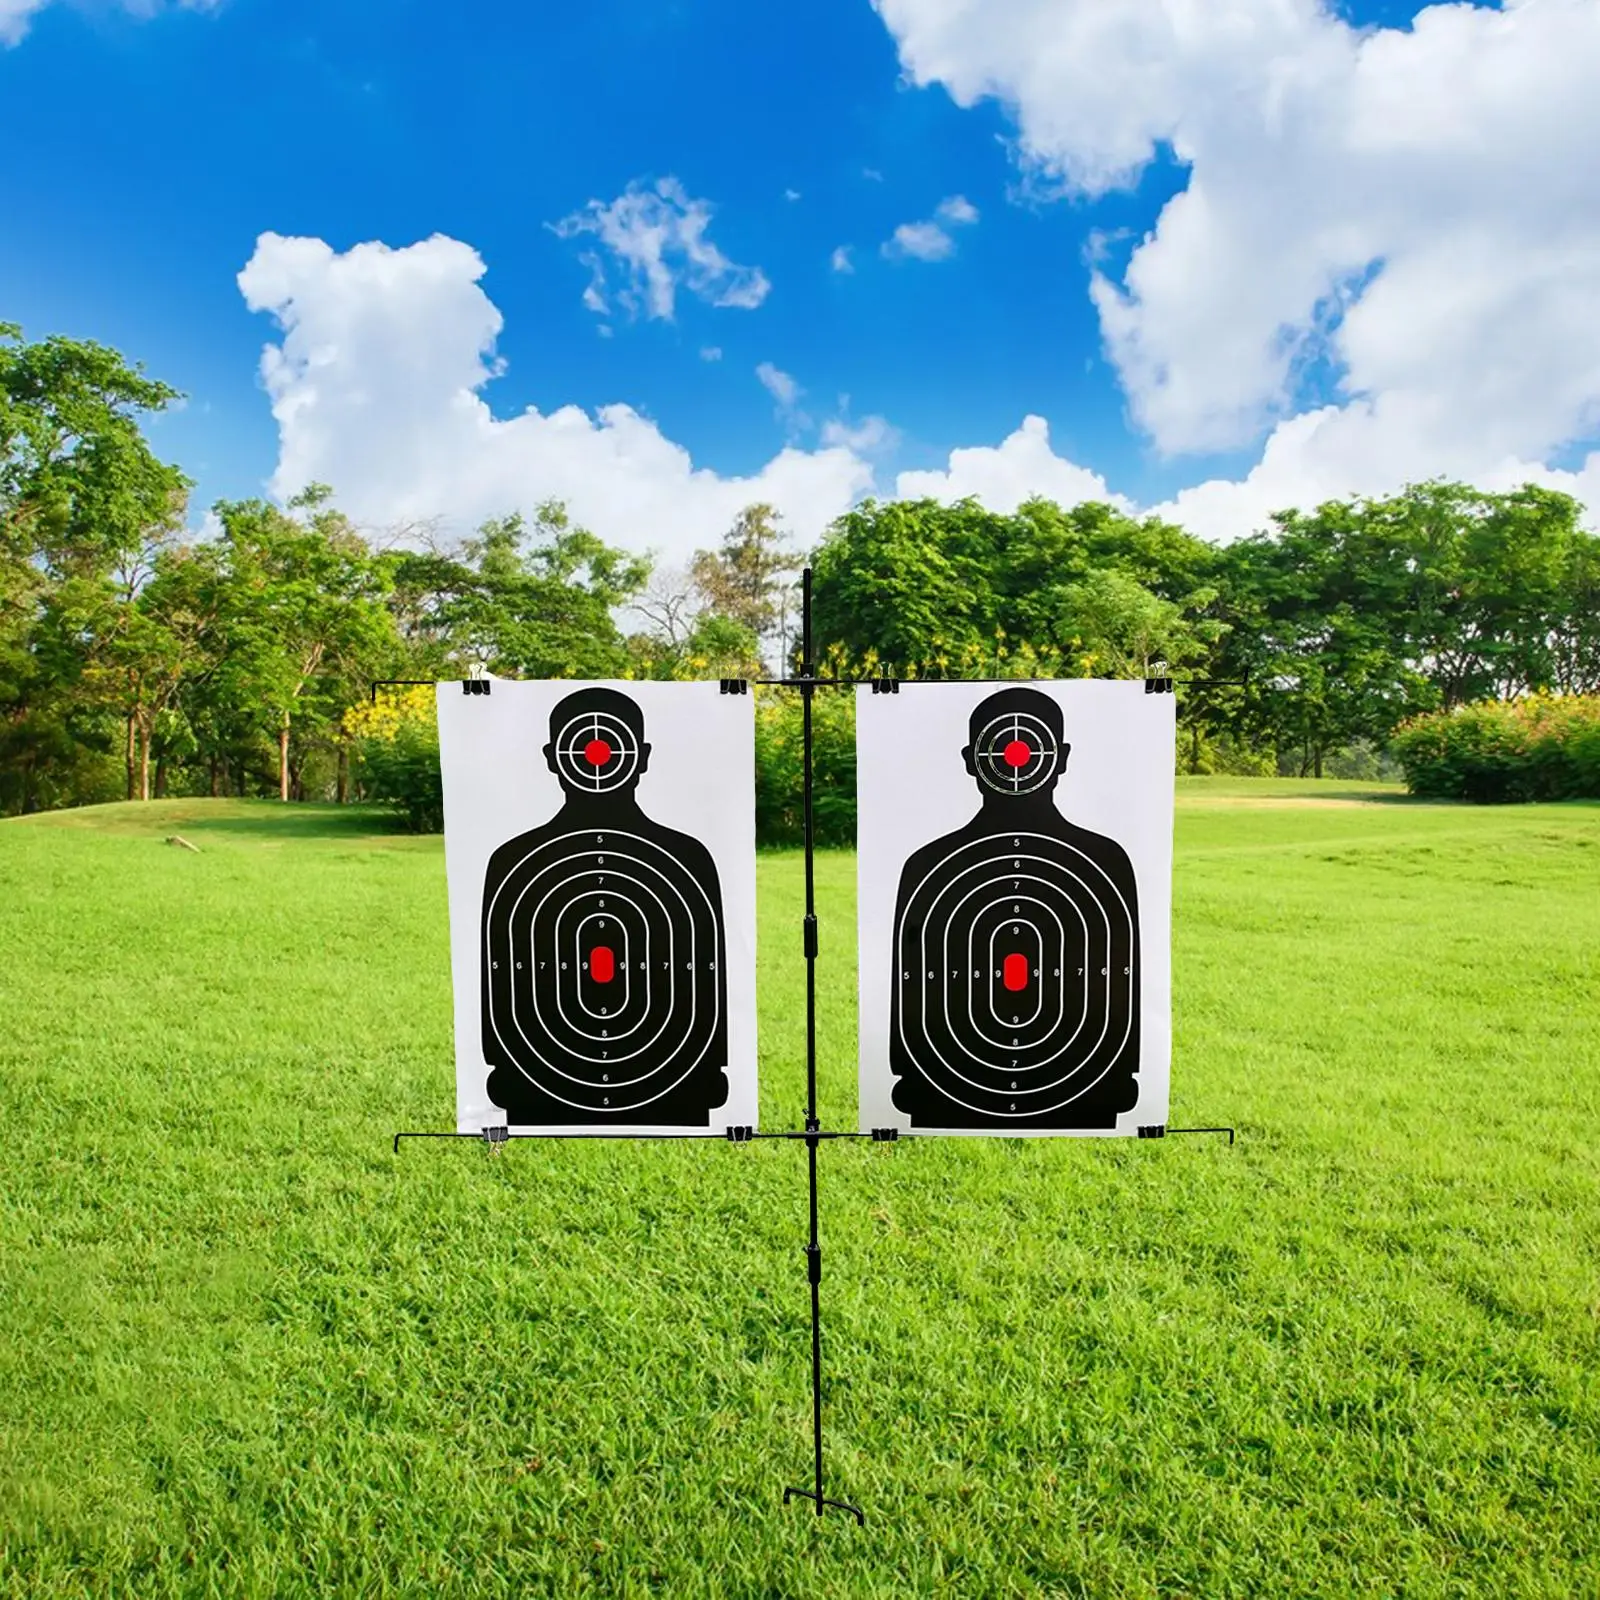 Target Stand Holder Double Paper Target Stand Portable Archery Holds 2 Paper Target Outdoors Activities Durable Garden Hunting